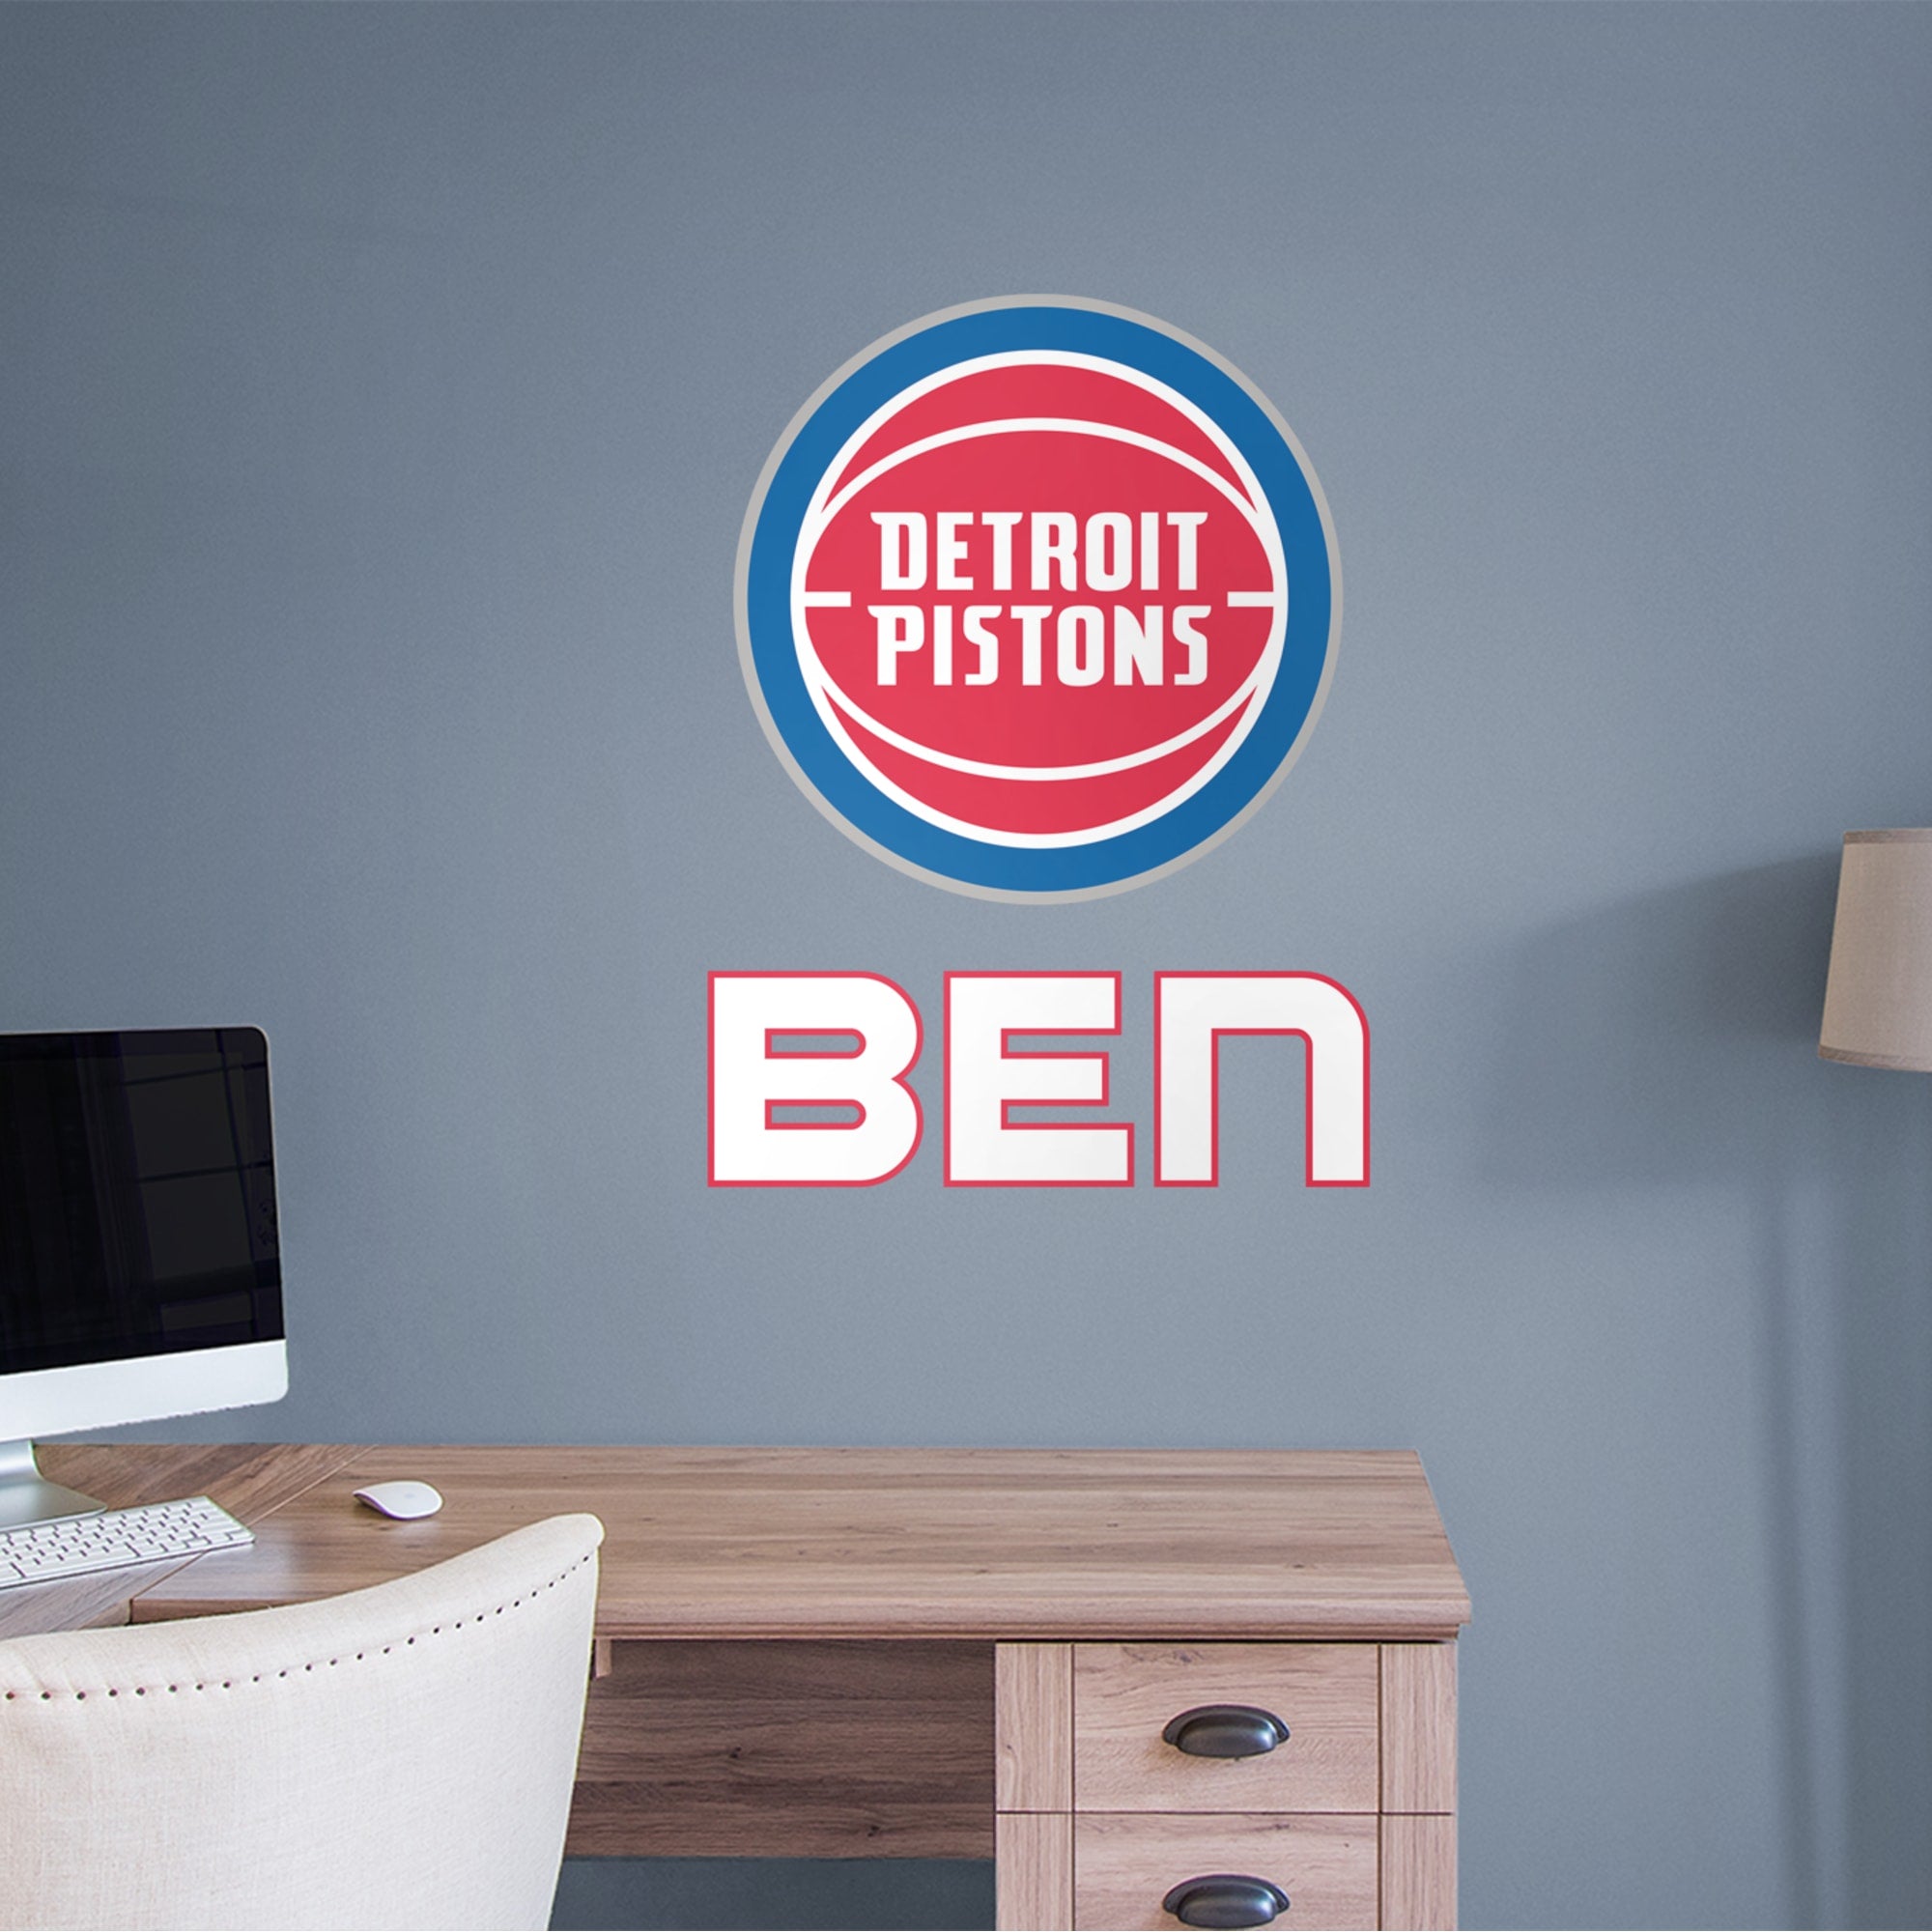 Detroit Pistons: Stacked Personalized Name - Officially Licensed NBA Transfer Decal in White (39.5"W x 52"H) by Fathead | Vinyl